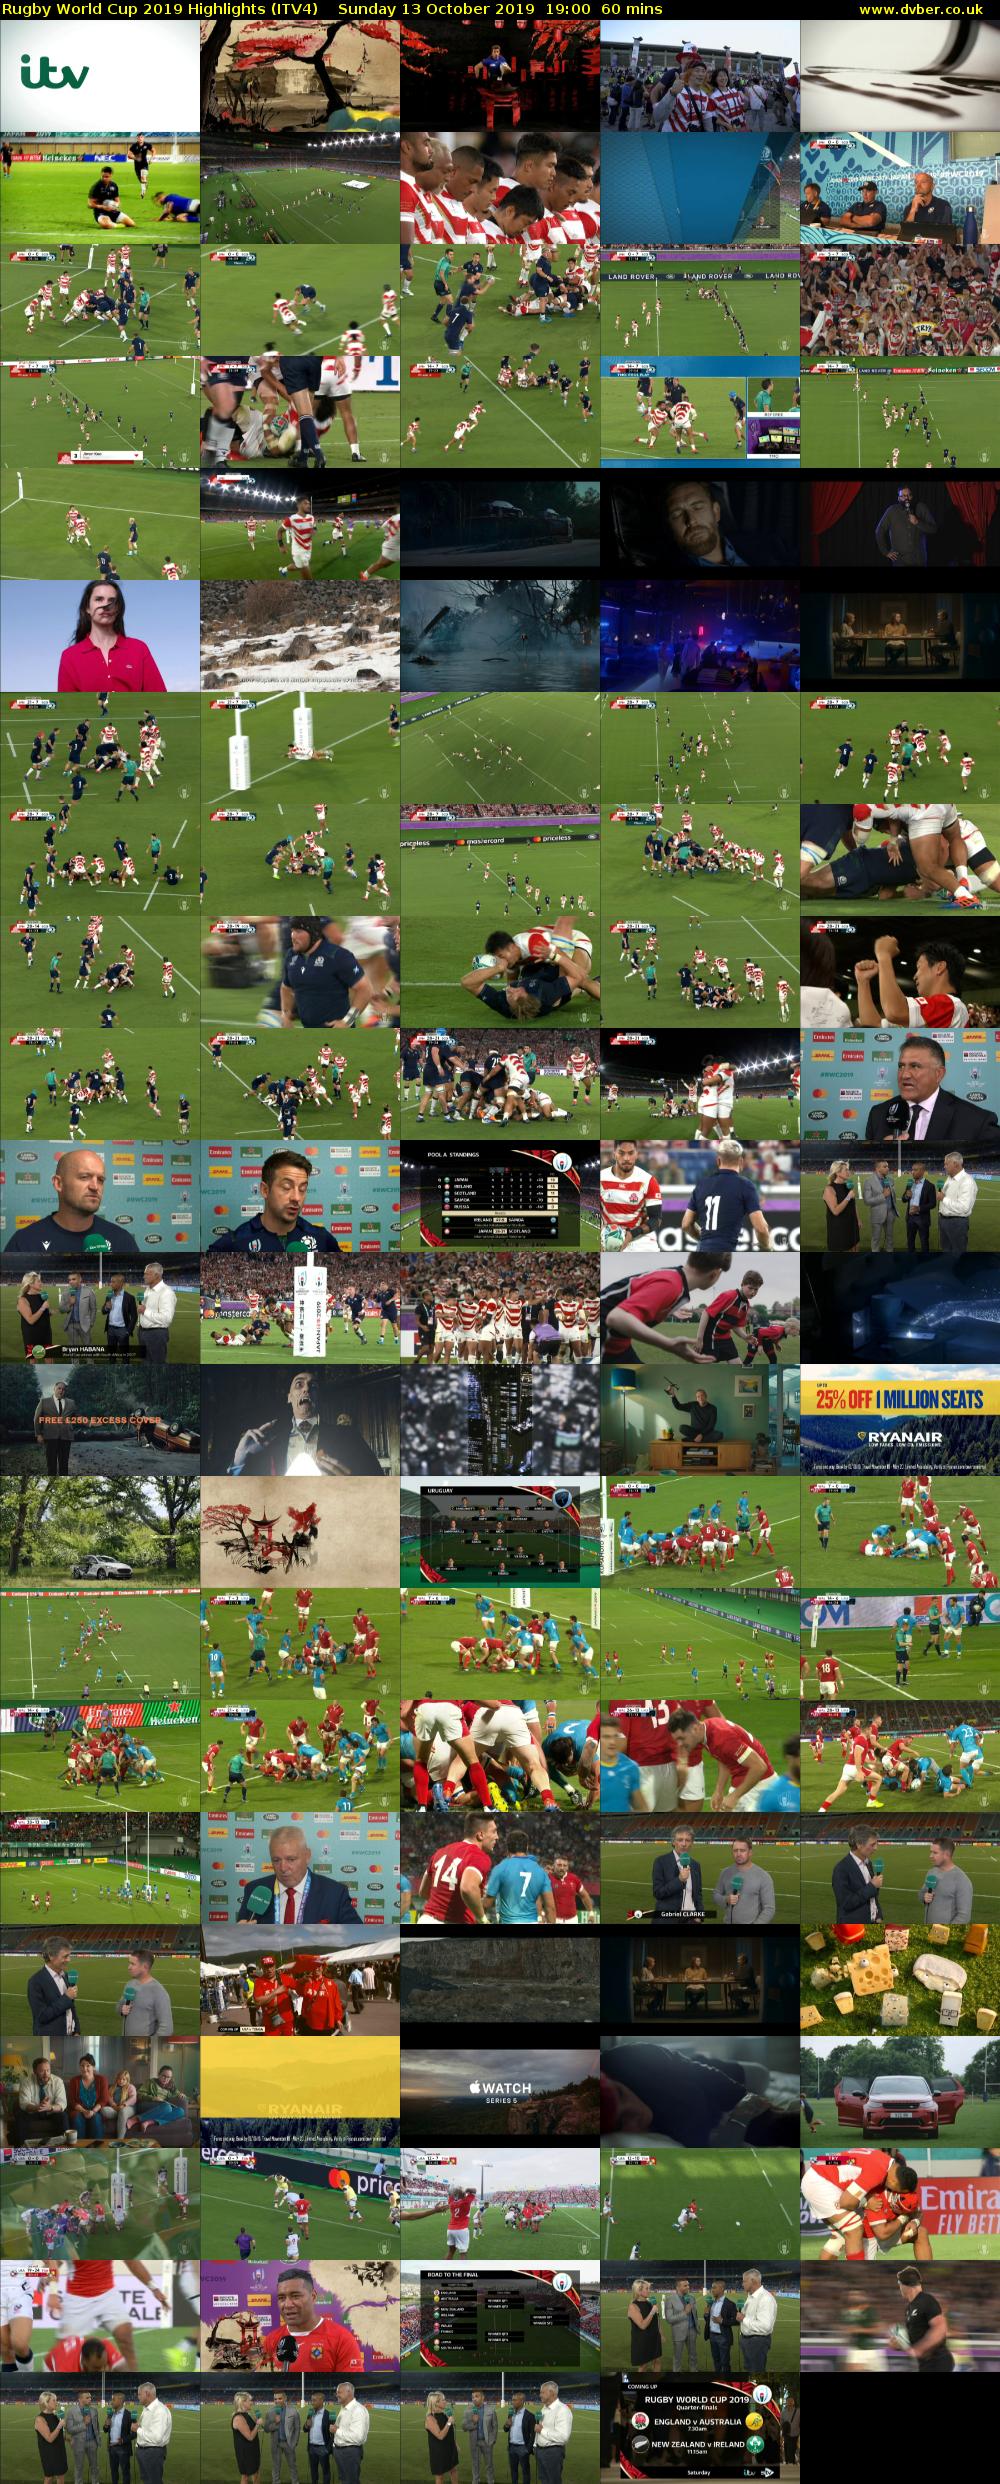 Rugby World Cup 2019 Highlights (ITV4) Sunday 13 October 2019 19:00 - 20:00